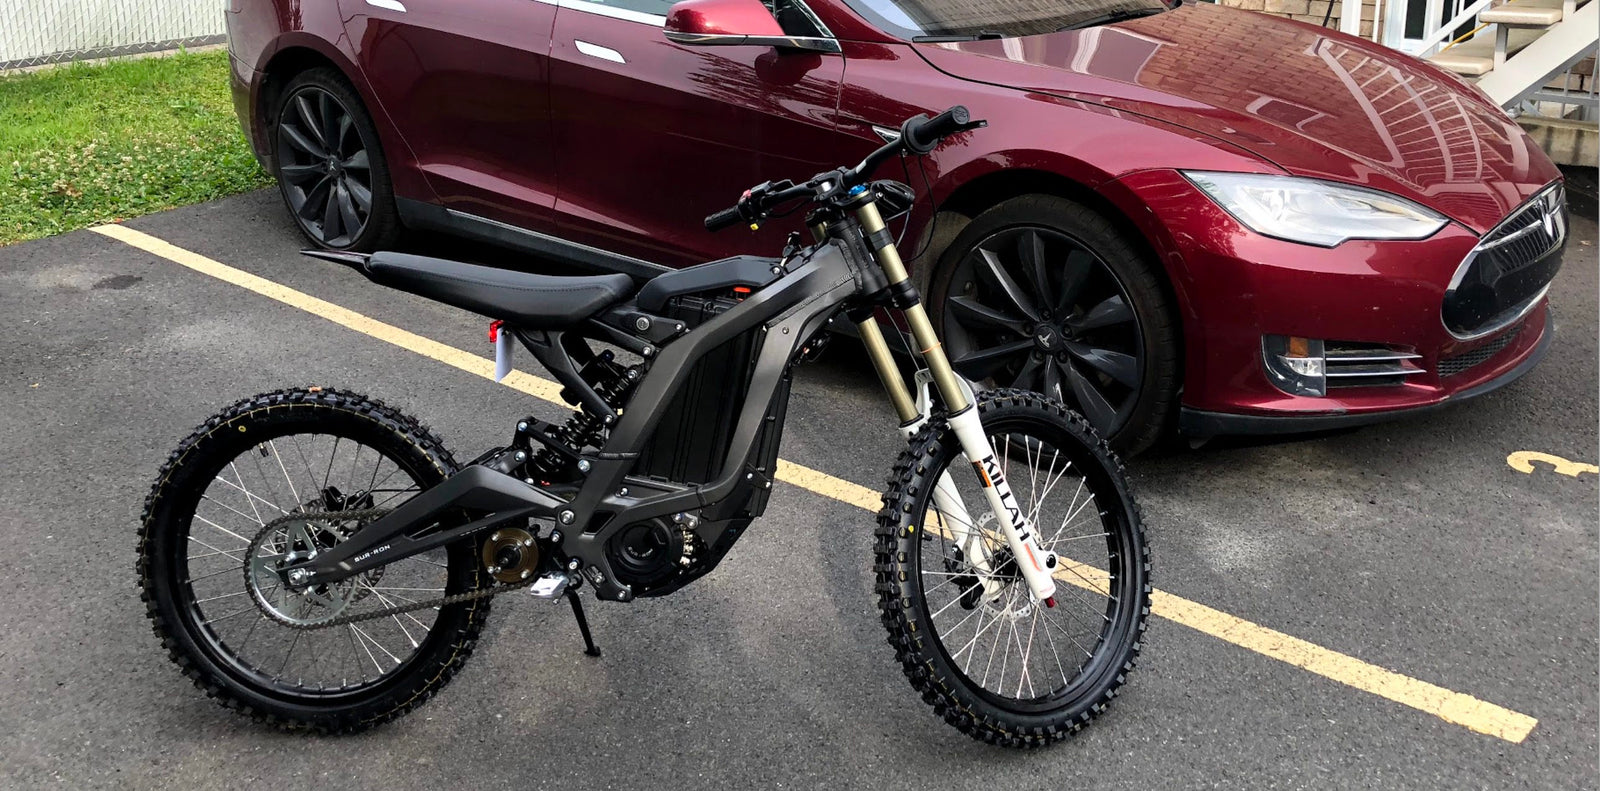 Sur-Ron is a monster electric bike with 50 miles of range and insane top speed